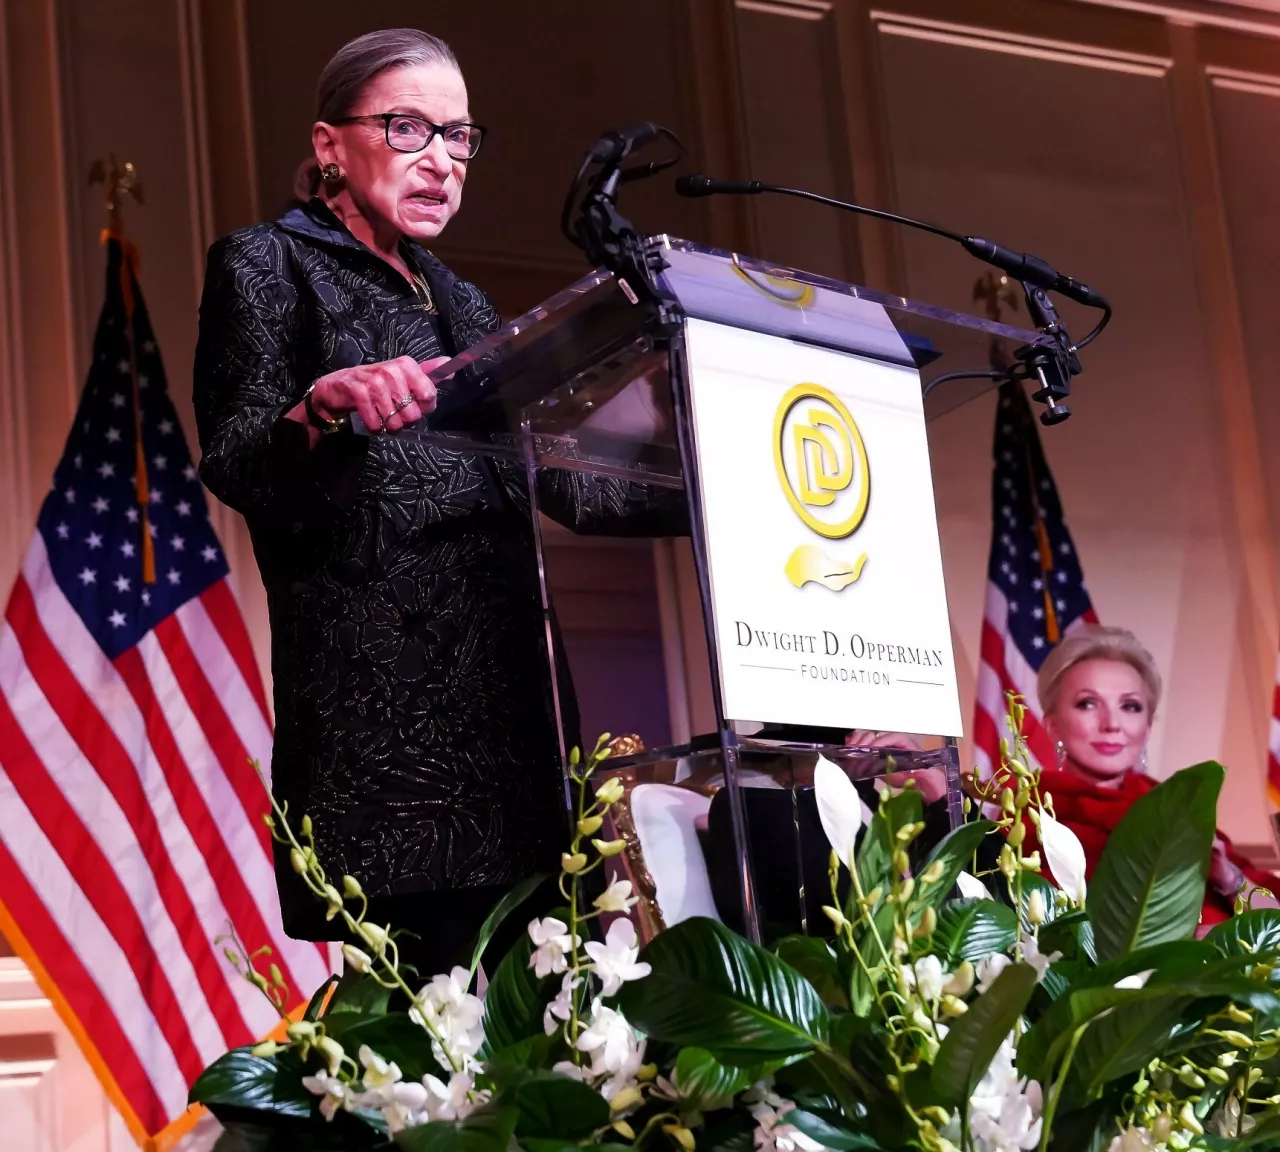 Ruth Bader Ginsburg, speaking at the inaugural Justice Ruth Bader Ginsburg Woman in Leadership awards ceremony in 2020, with Julie Opperman, of the Dwight D. Opperman Foundation, looking on. (RBG Award) img#2